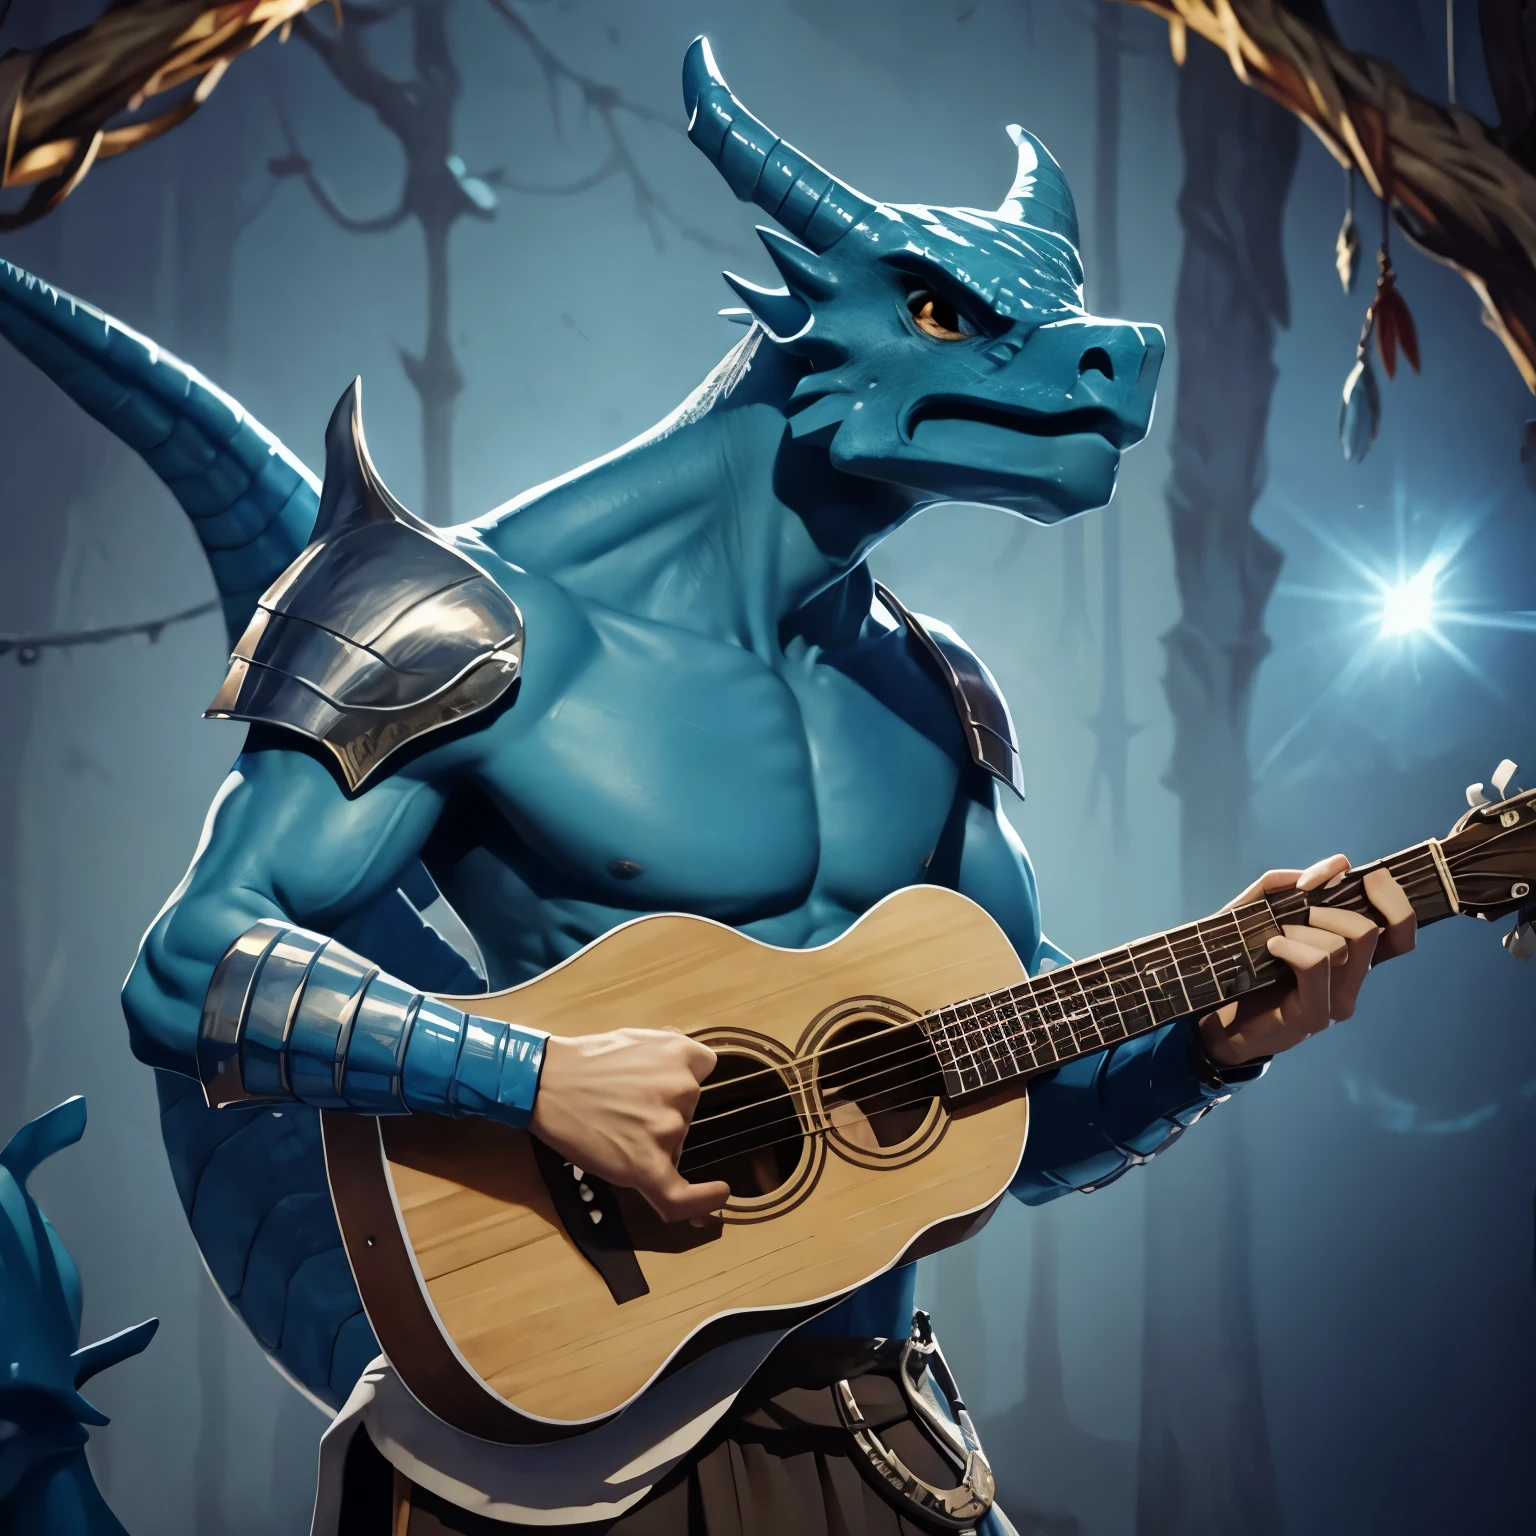 Create a designer role-playing character in modern cartoon style, create a blue dragonborn bard, he has light armor and a wooden guitar. The background and the dragonborn playing at a festival with people around.